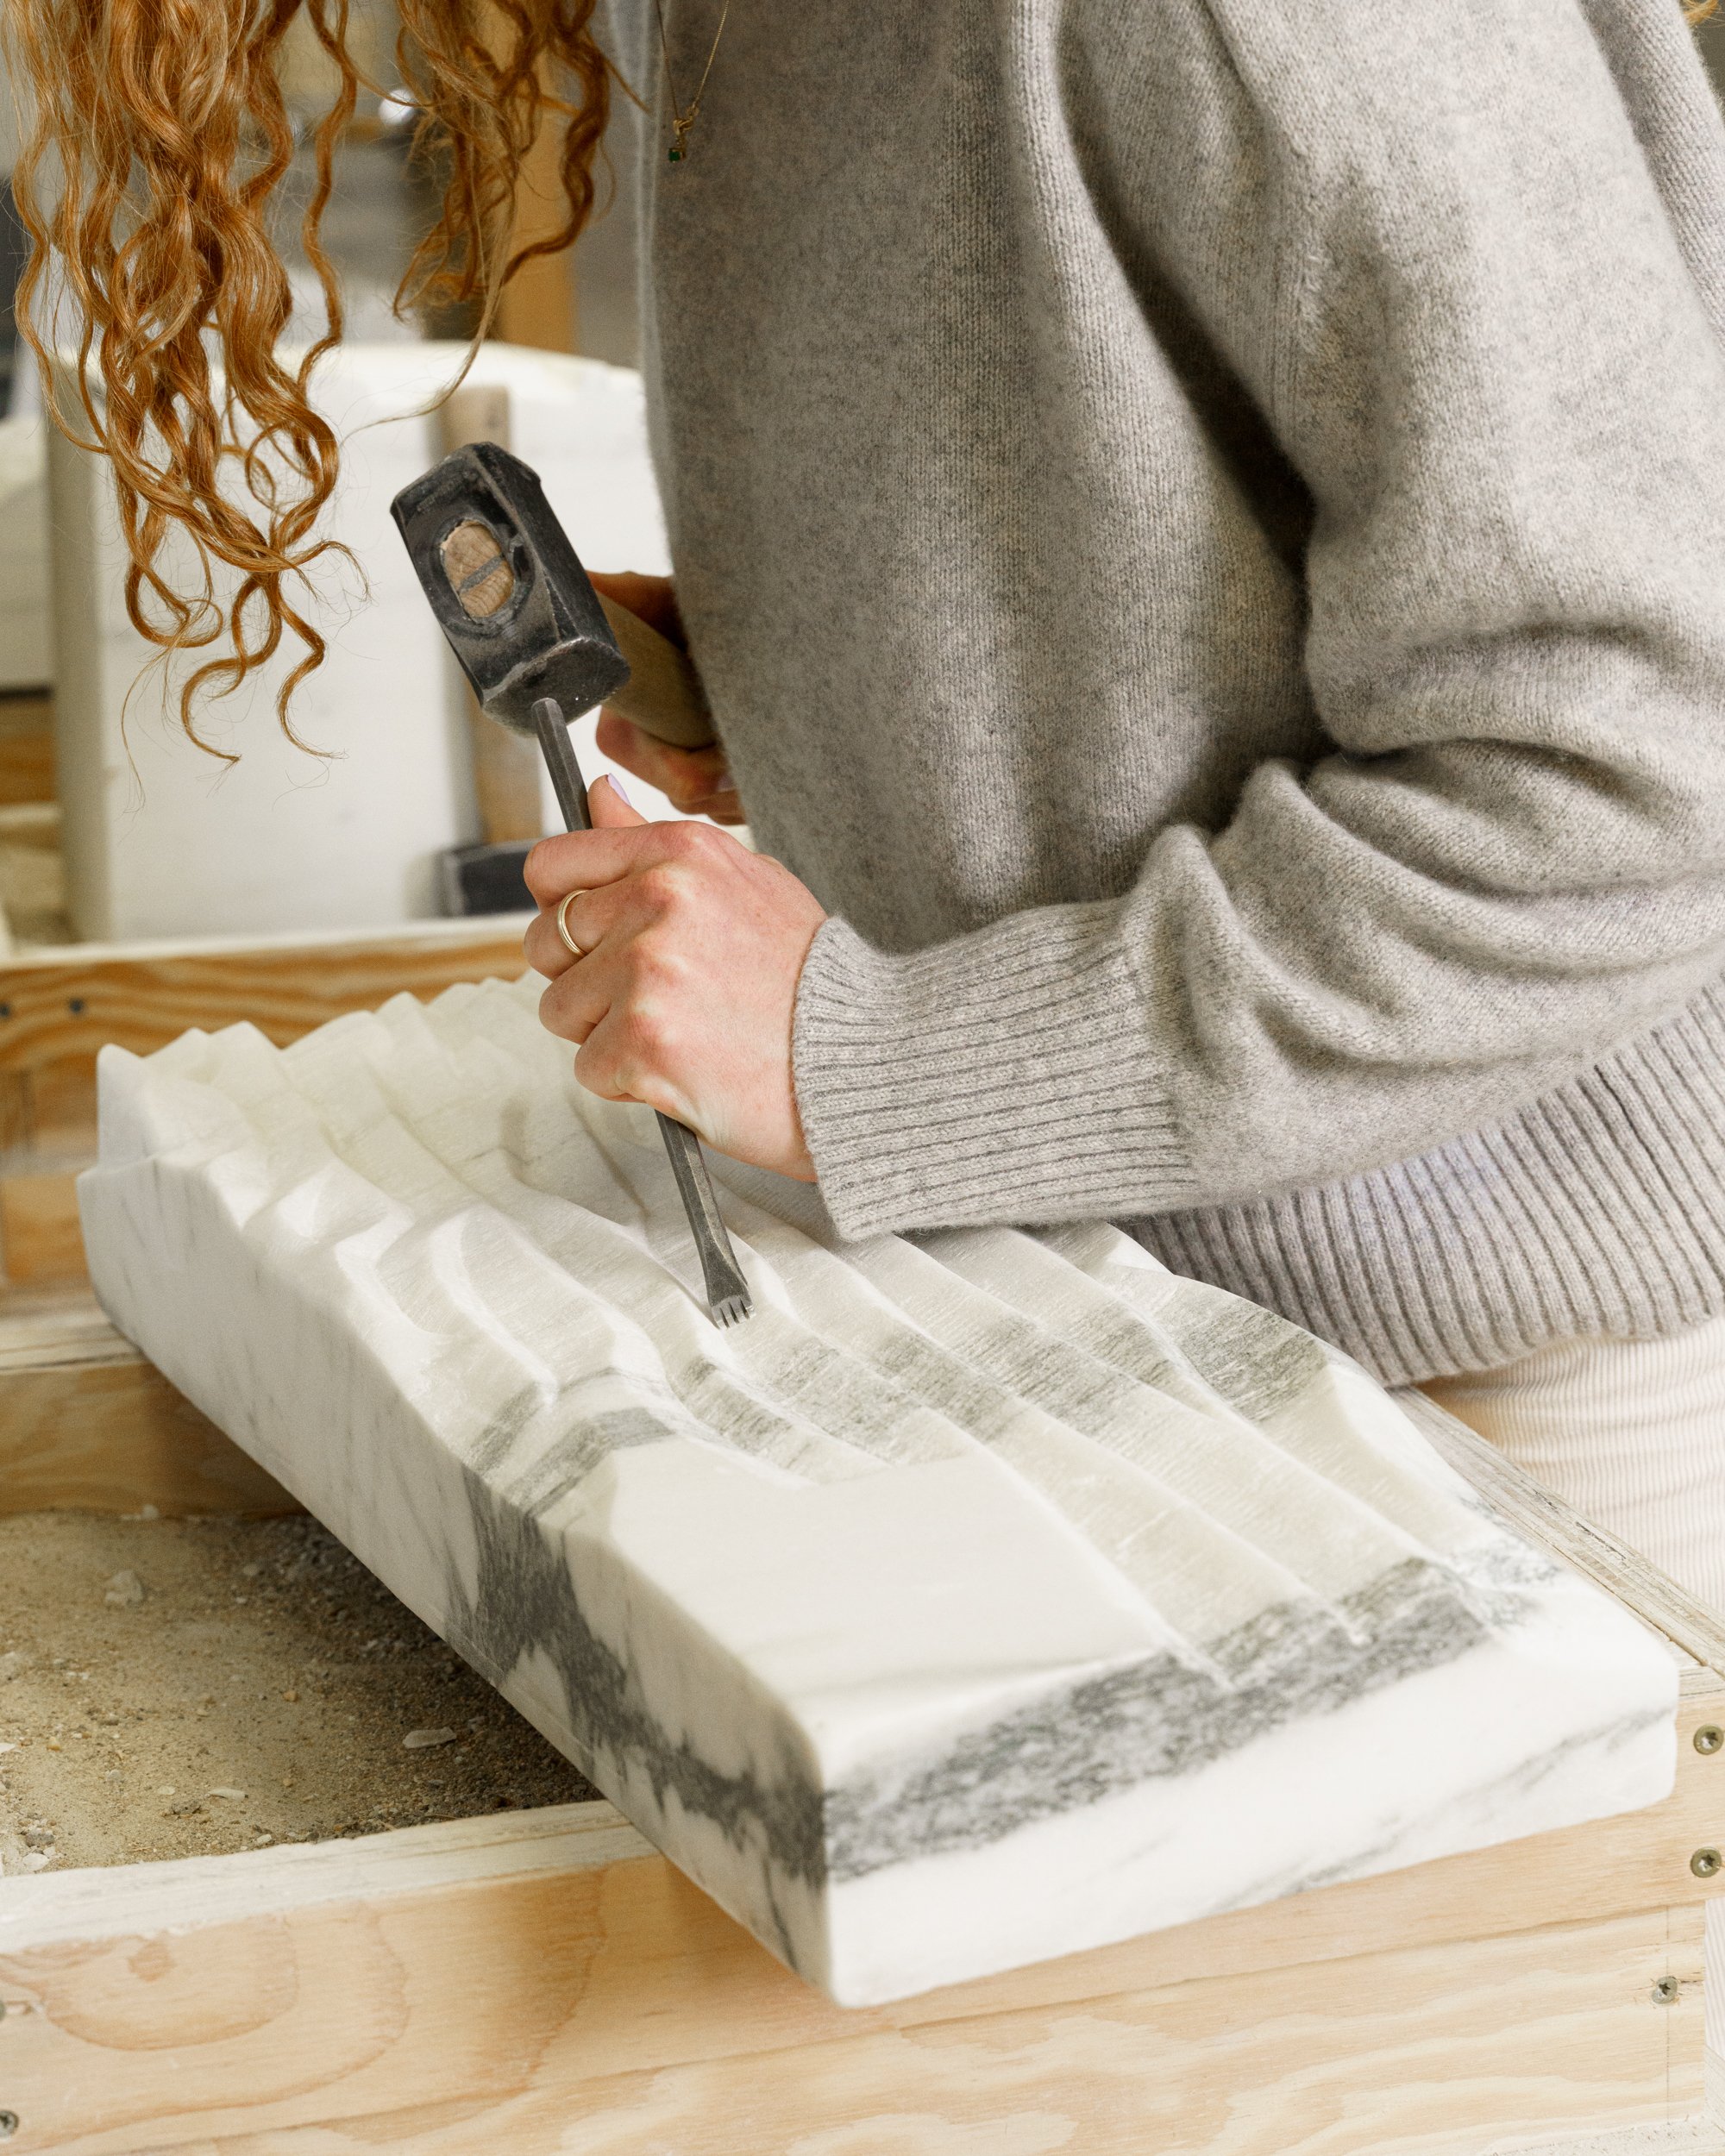 Mira DiSilvestro chiseling marble